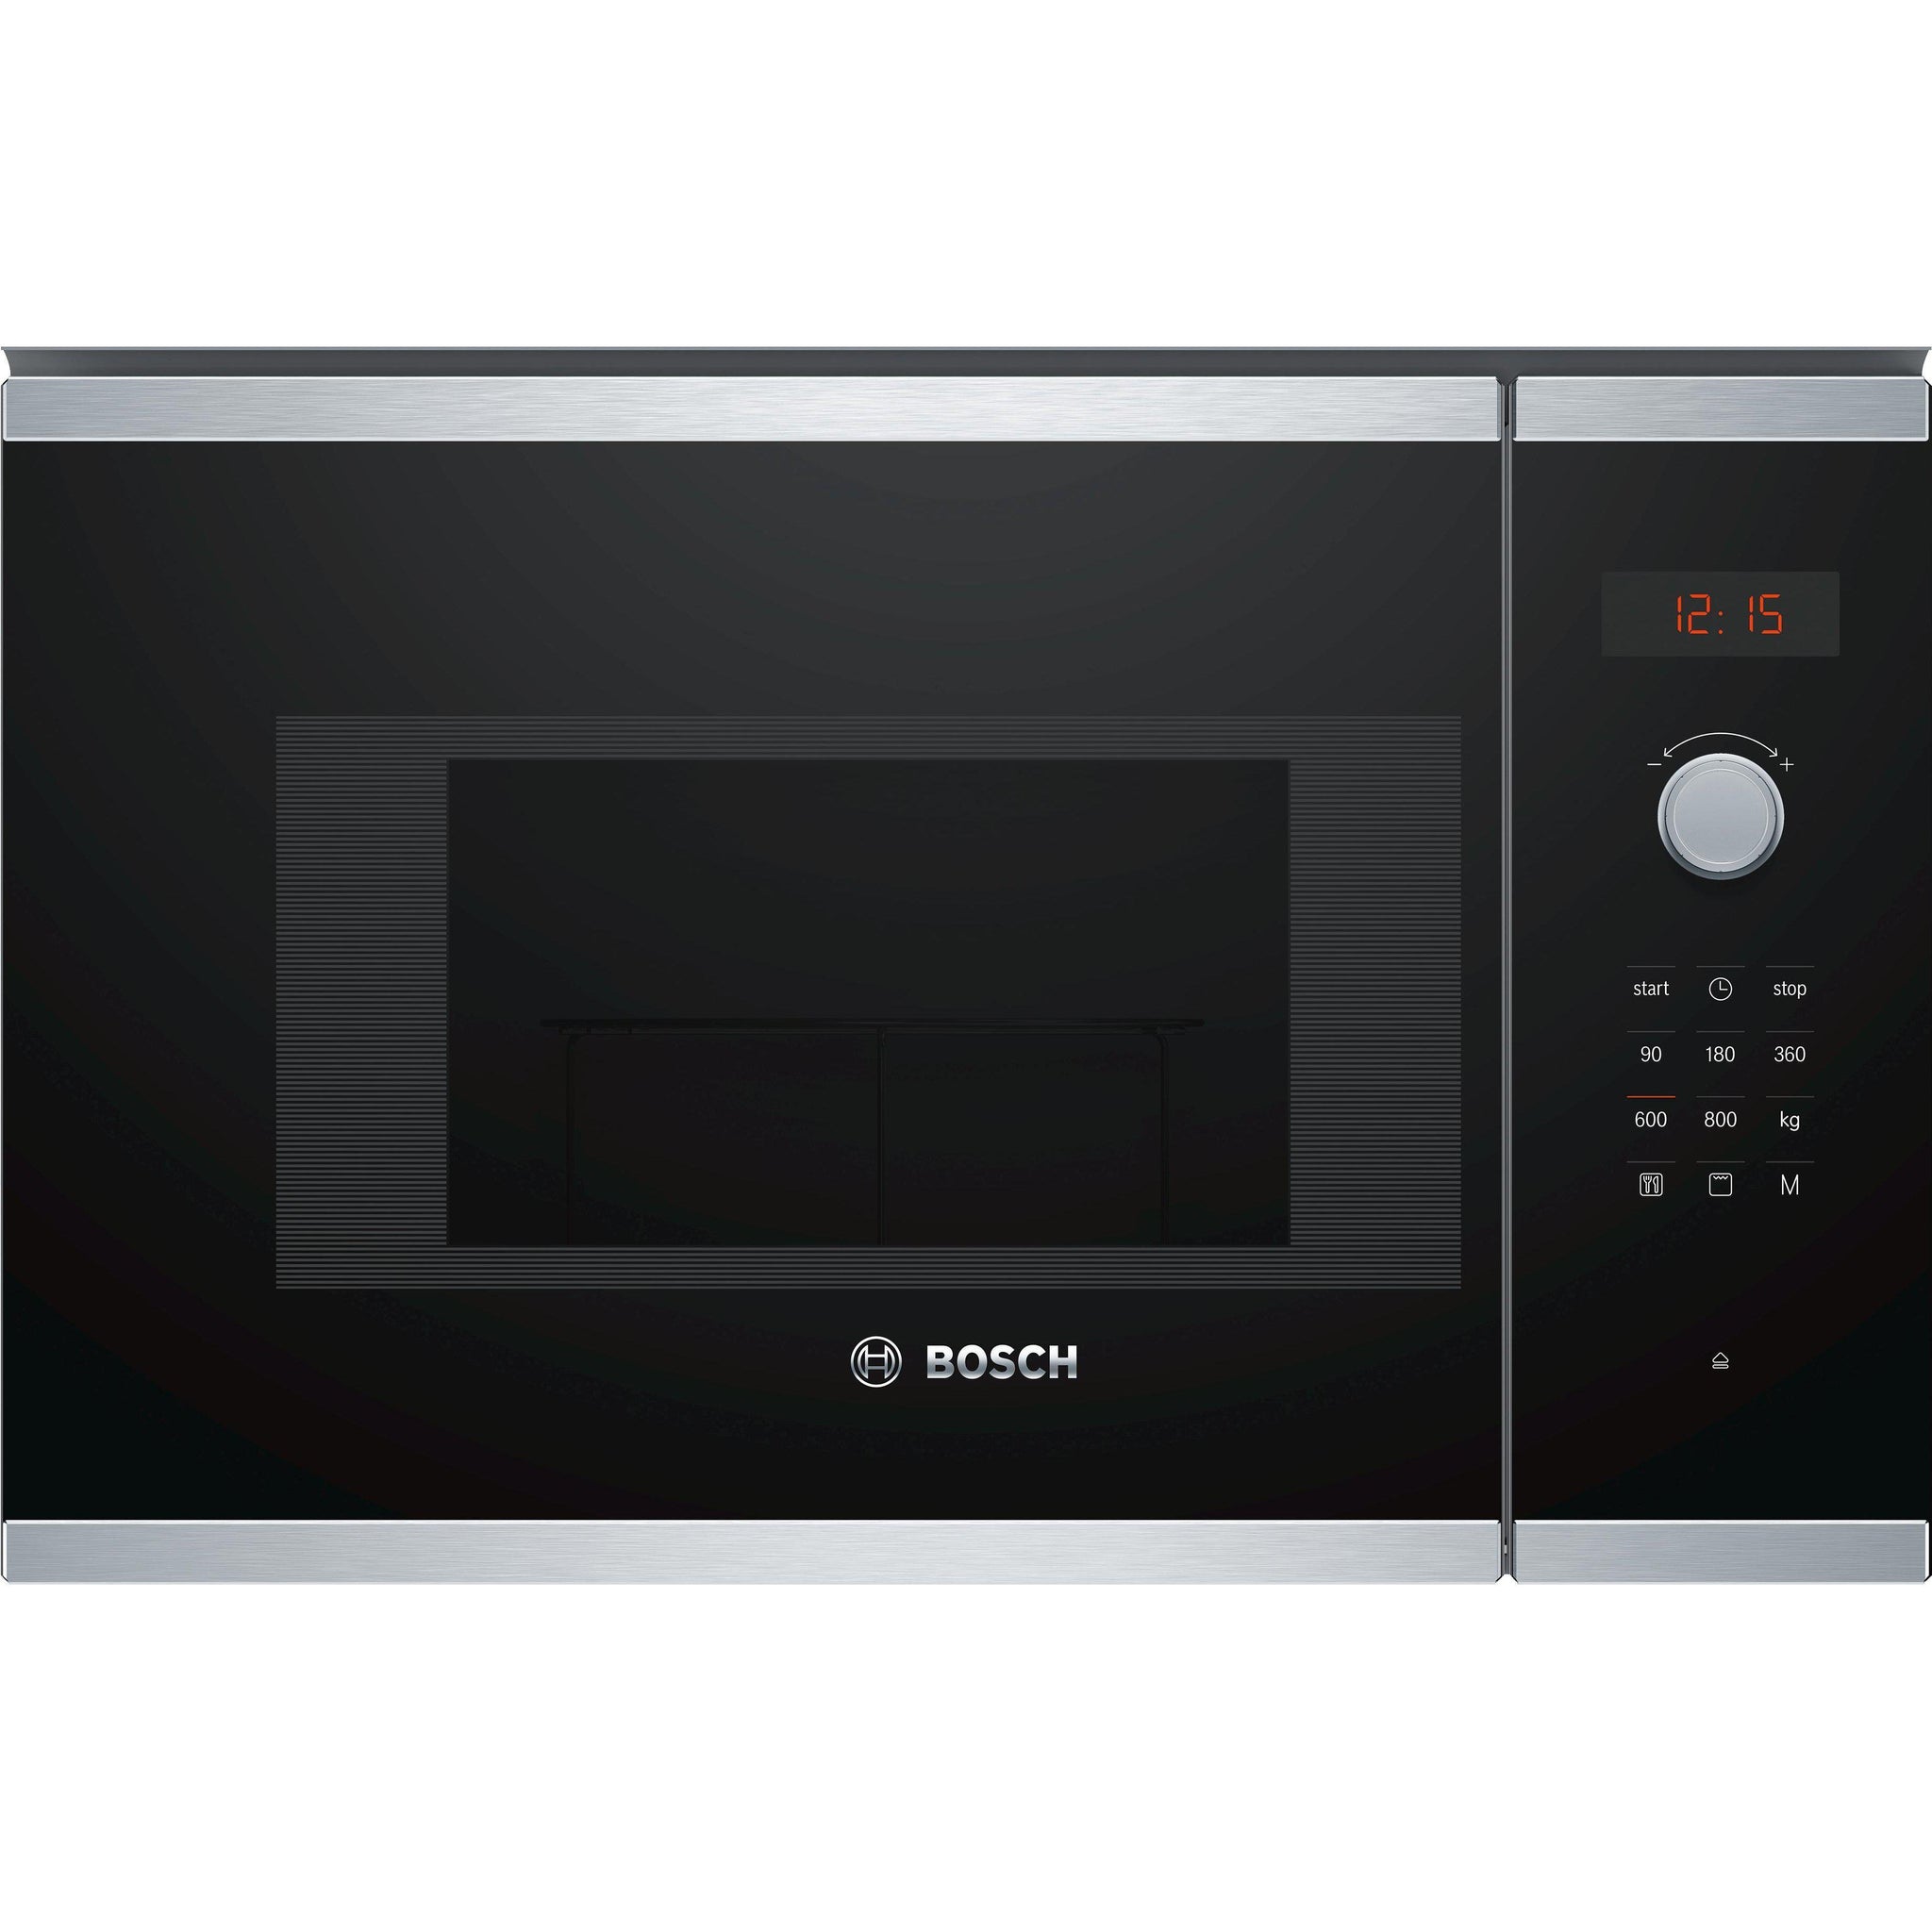 Bosch Serie 4 Bel523ms0b Builtin Microwave Brushed Steel Delivery Within 710 Days